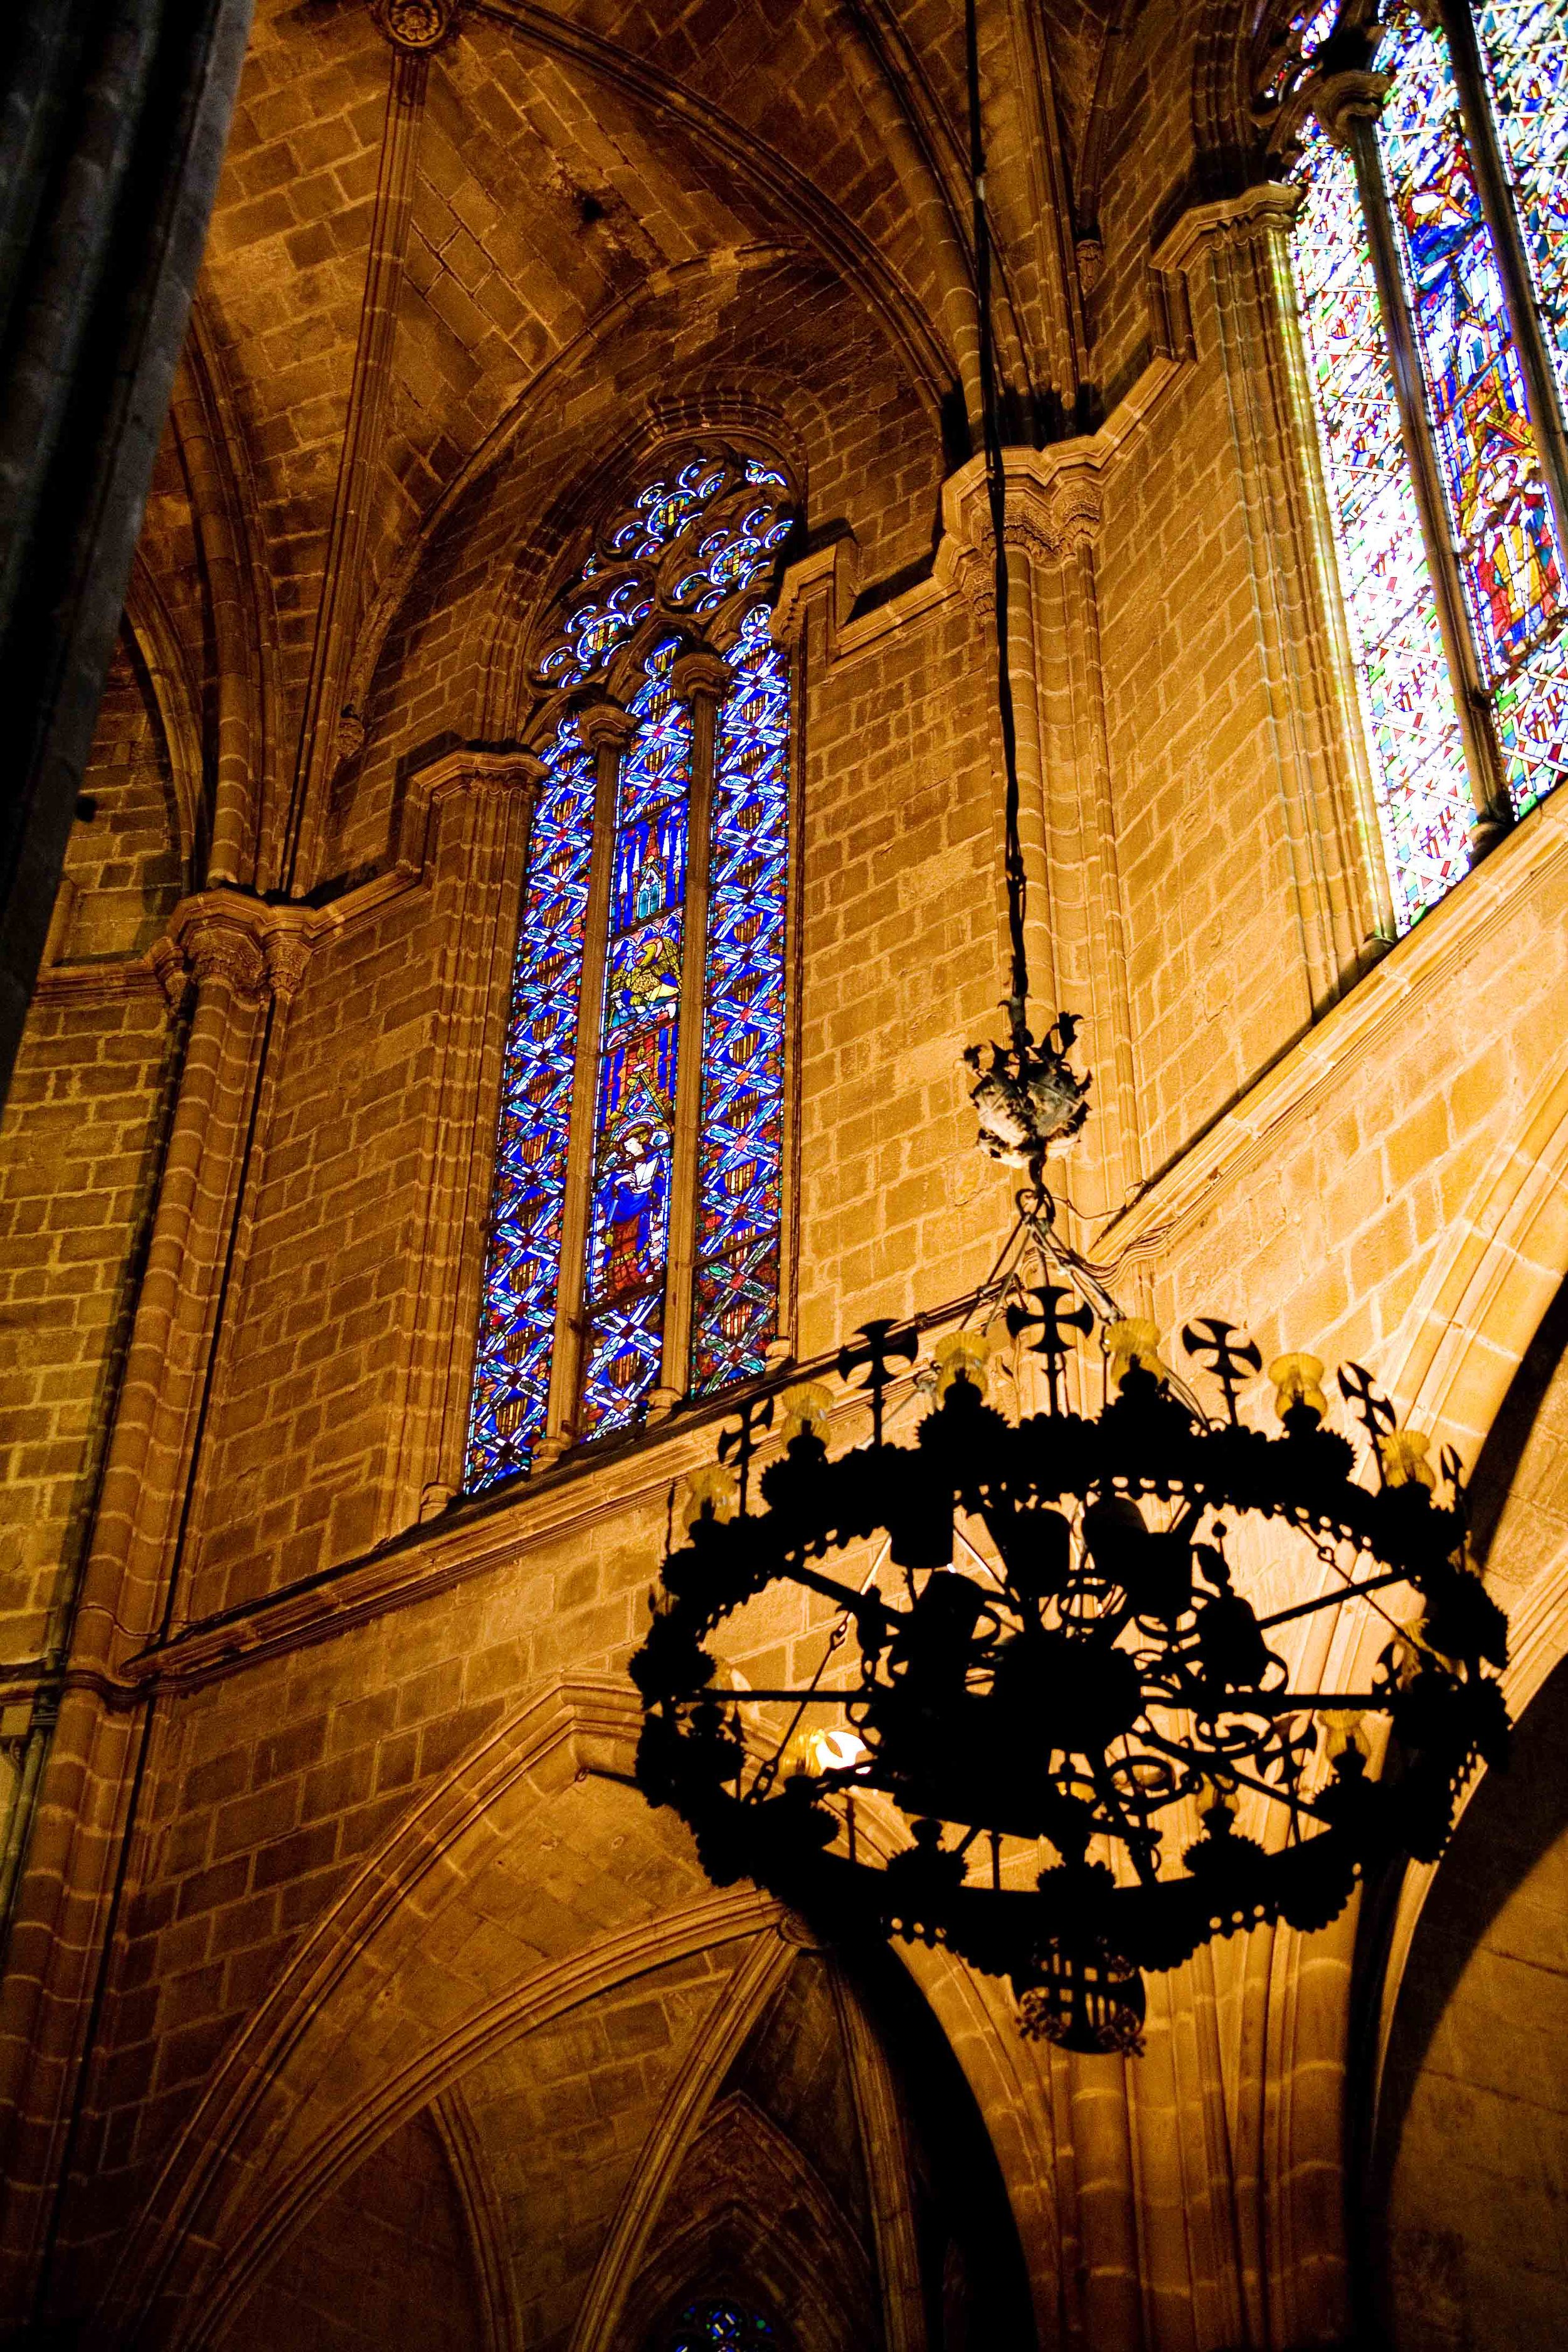 A-Cathedral Interior 2A.jpg